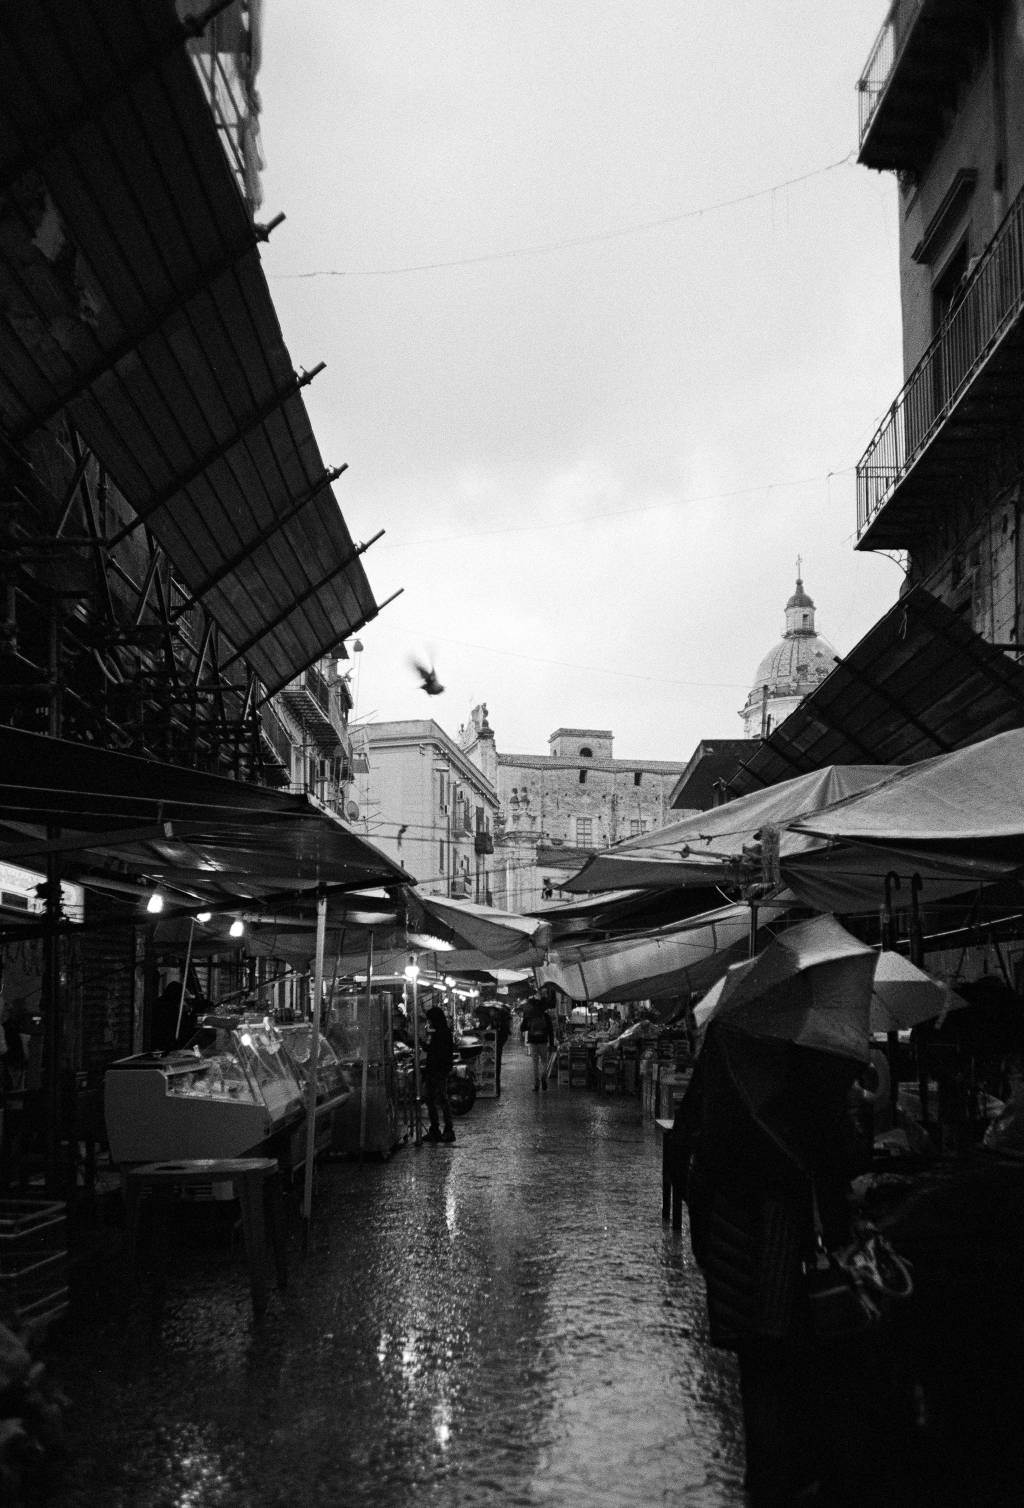 A street market in a rainy day.